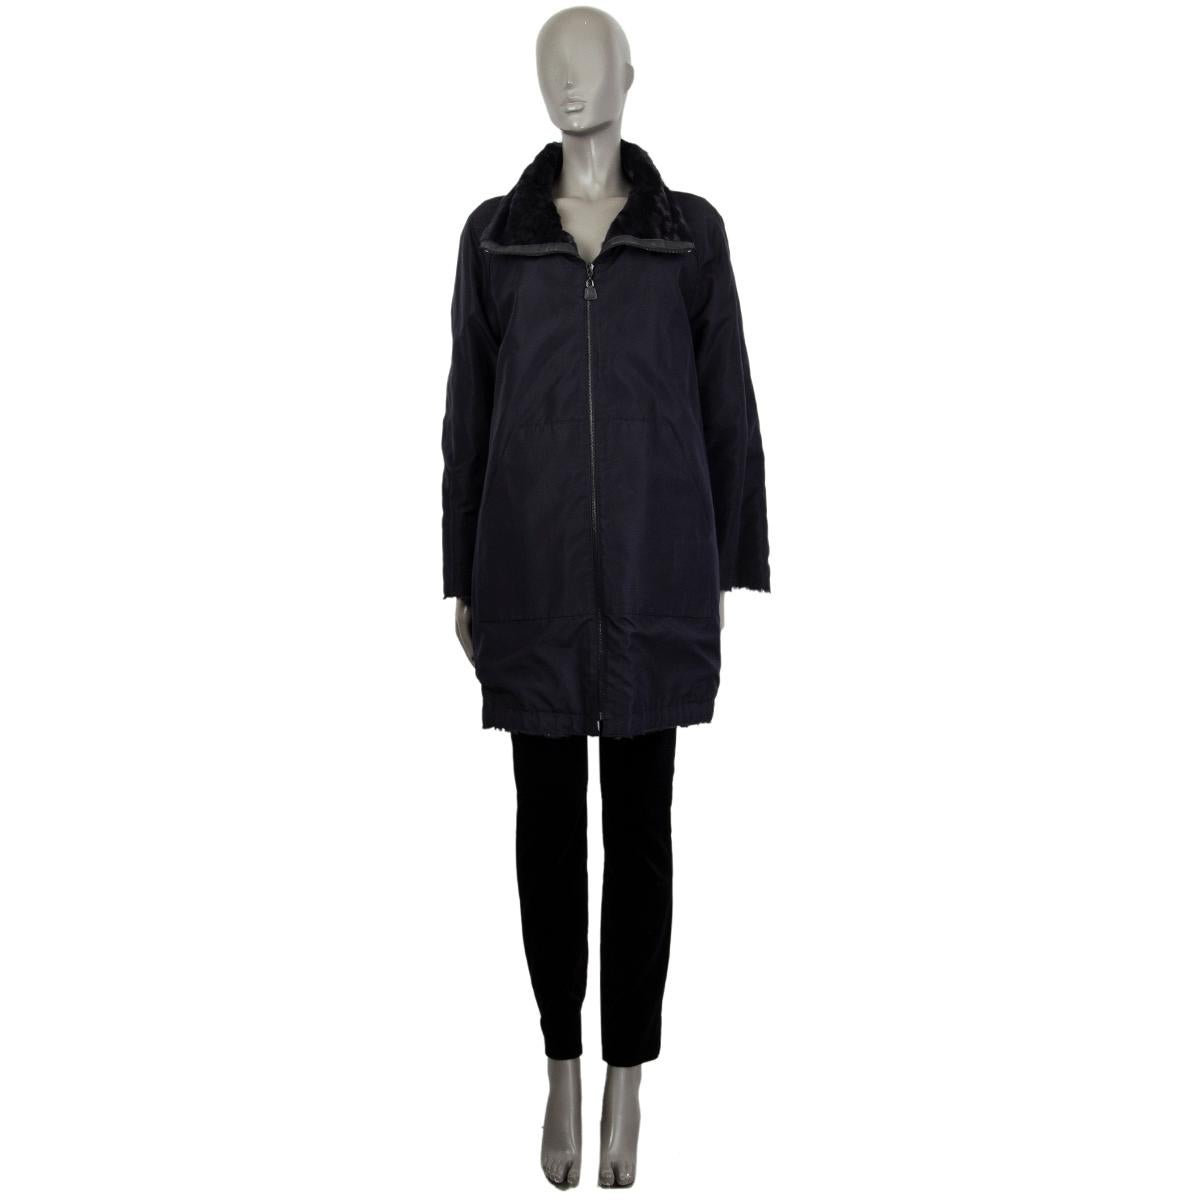 100% authentic AKRIS reversible coat in midnight blue long sheep shearling (100%) with a hidden hood in the stand-up collar and two slit-pockets in the front. Closes with a zipper in the front. The revers side is in midnight blue viscose (100%) with